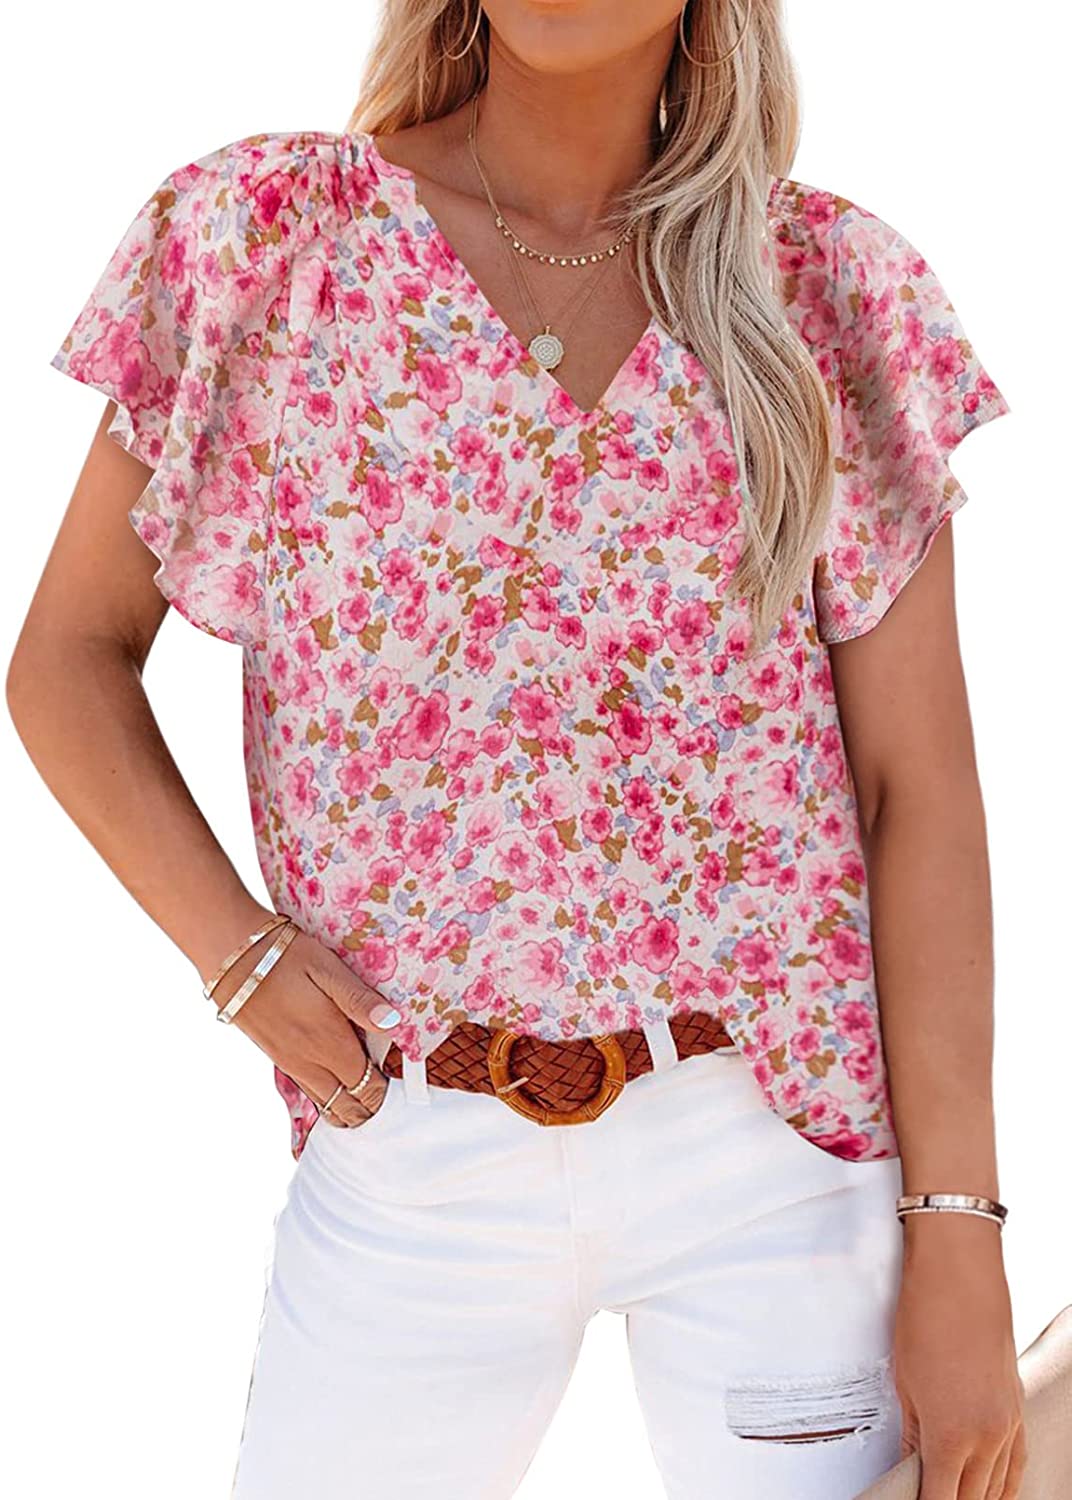 SHEWIN Womens Blouses Dressy Casual Floral Boho Tops Loose Long